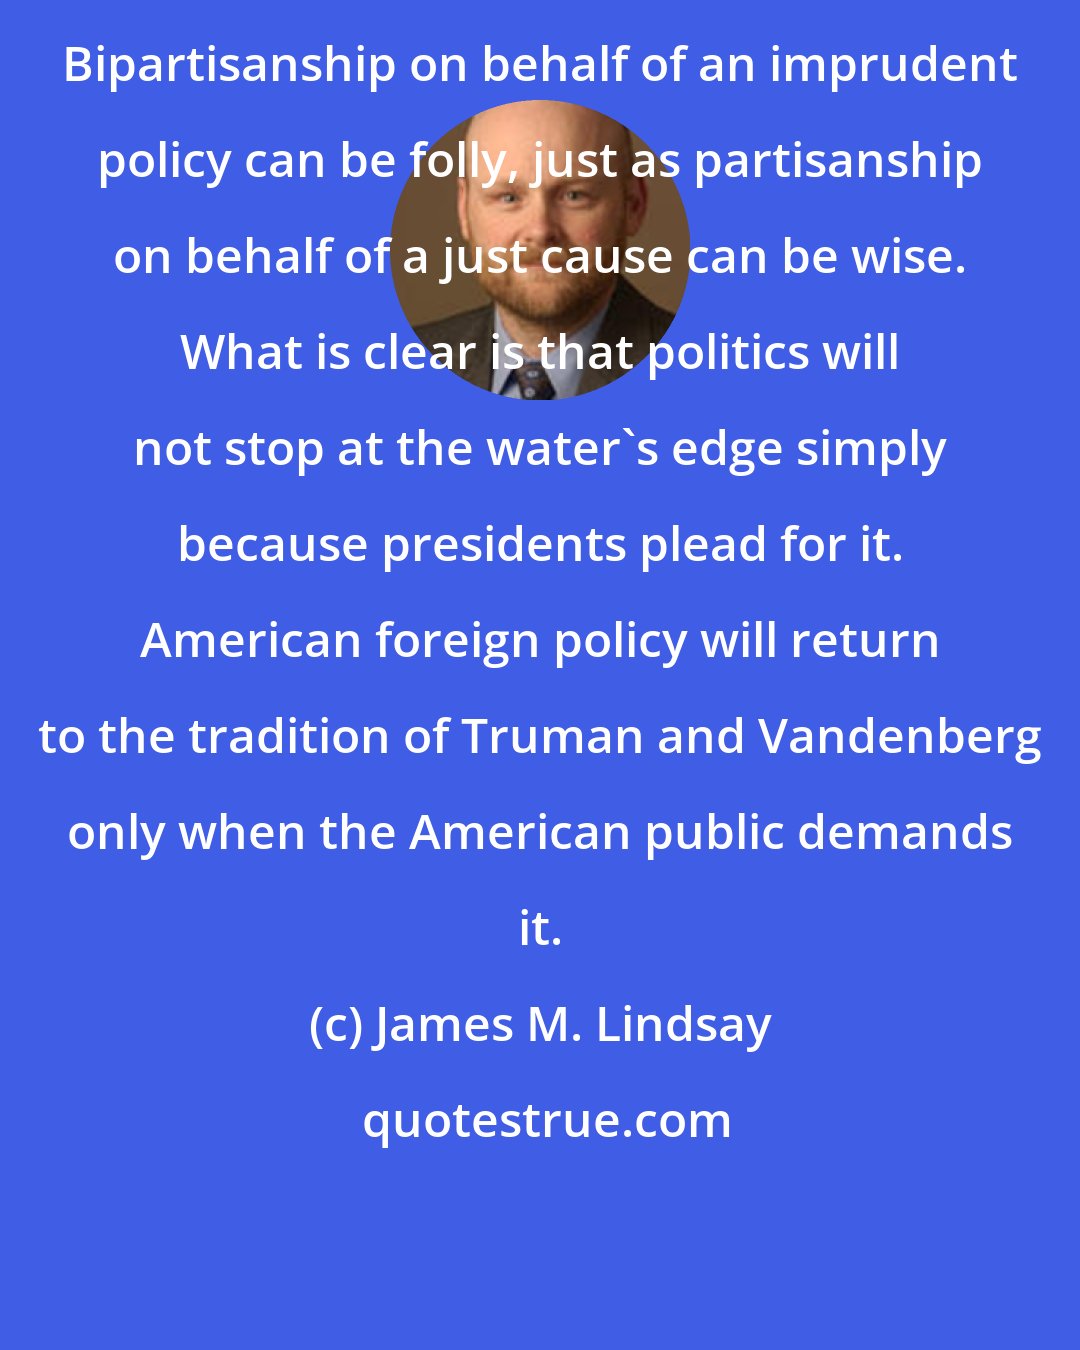 James M. Lindsay: Bipartisanship on behalf of an imprudent policy can be folly, just as partisanship on behalf of a just cause can be wise. What is clear is that politics will not stop at the water's edge simply because presidents plead for it. American foreign policy will return to the tradition of Truman and Vandenberg only when the American public demands it.